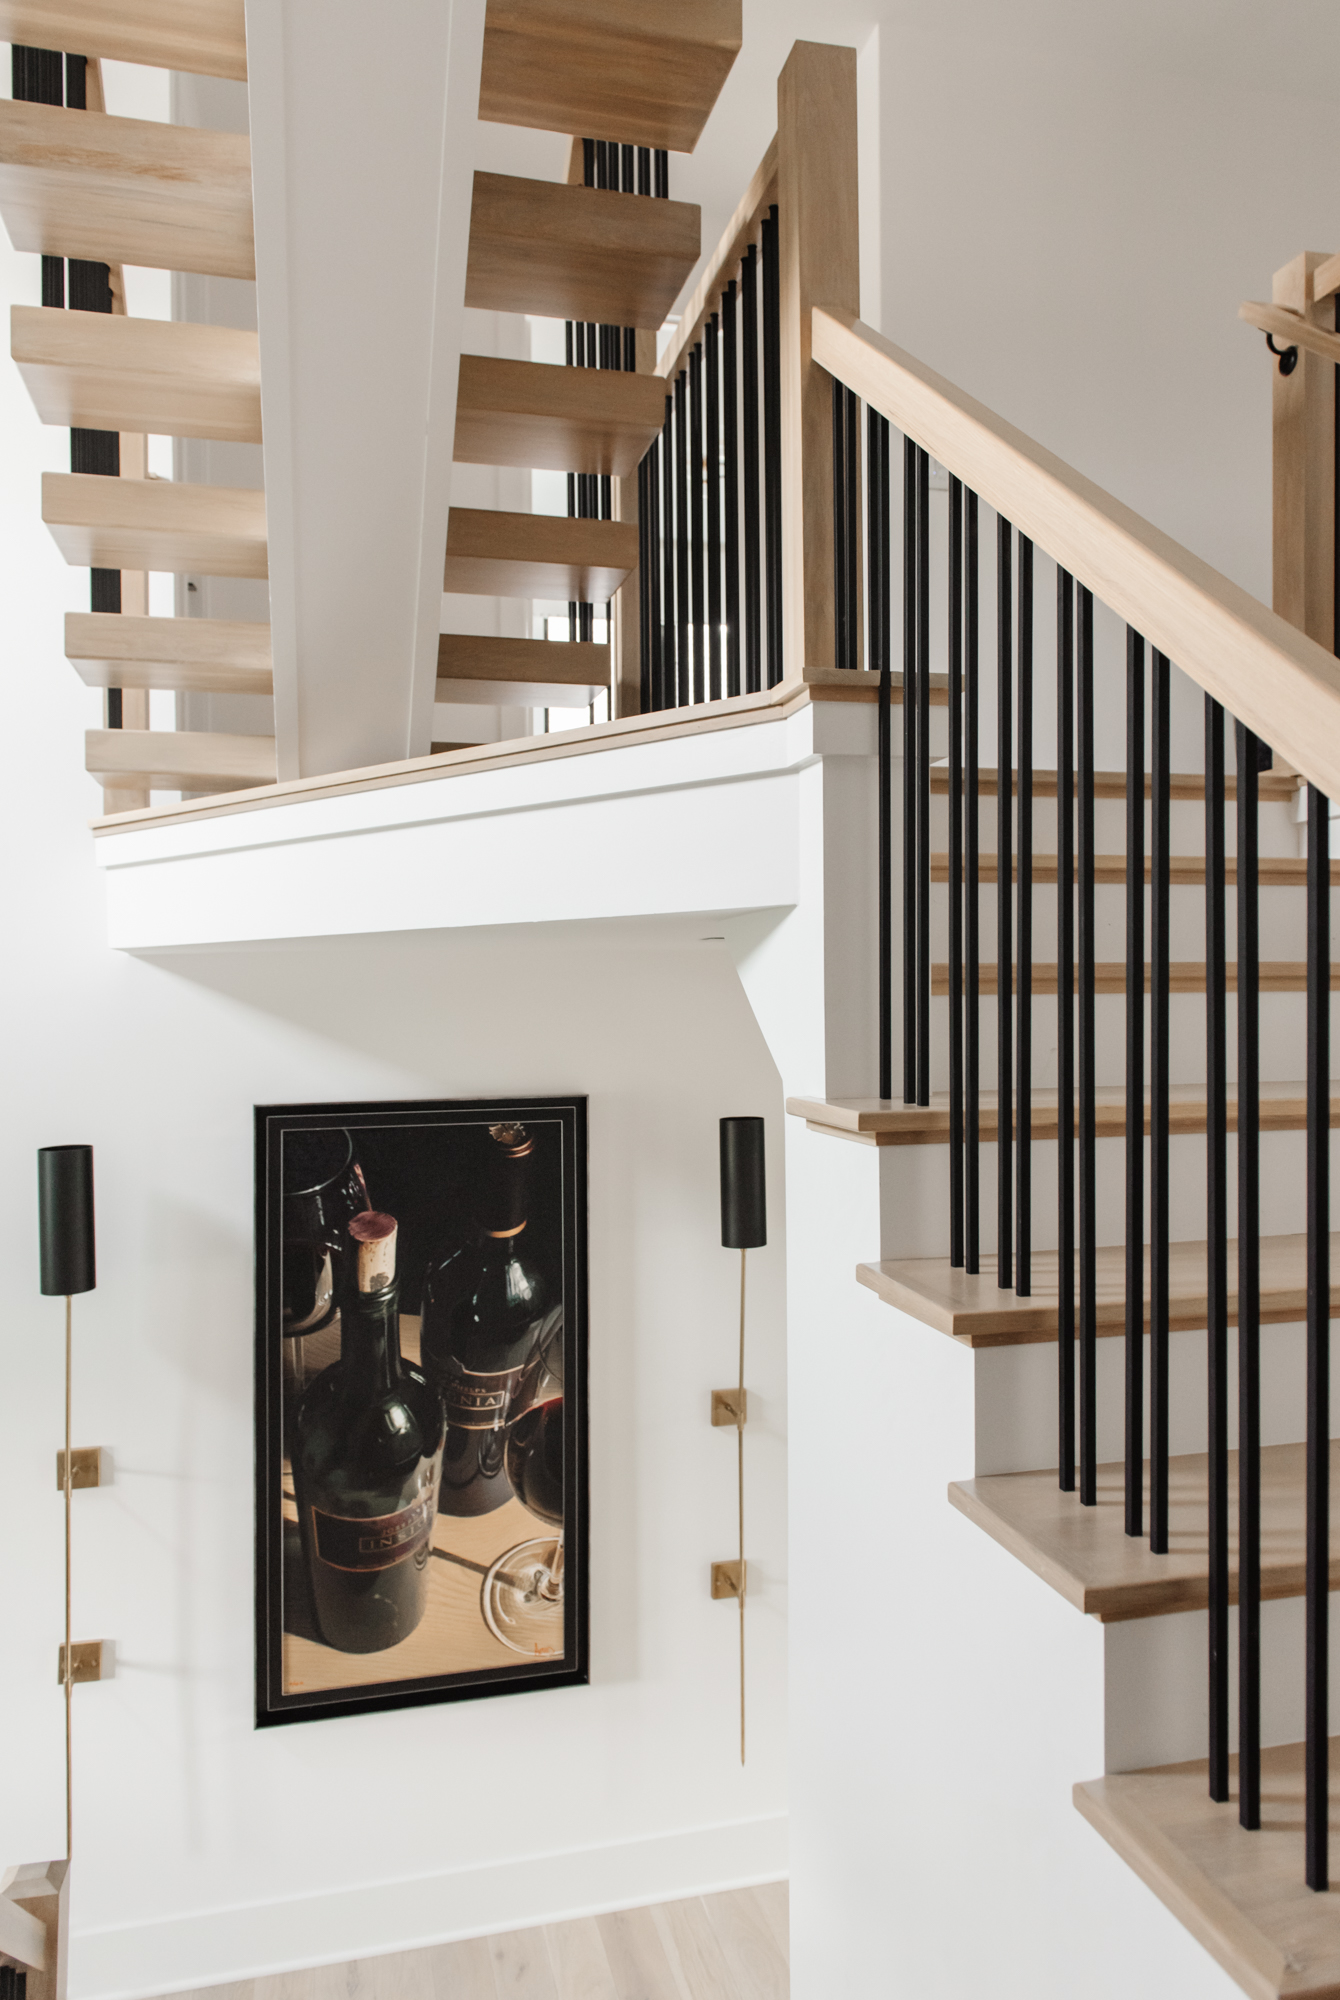 Modern floating stairs white white oak and iron balusters. Interior Design by LC Interiors, best interior designer in Naperville, Illinois.